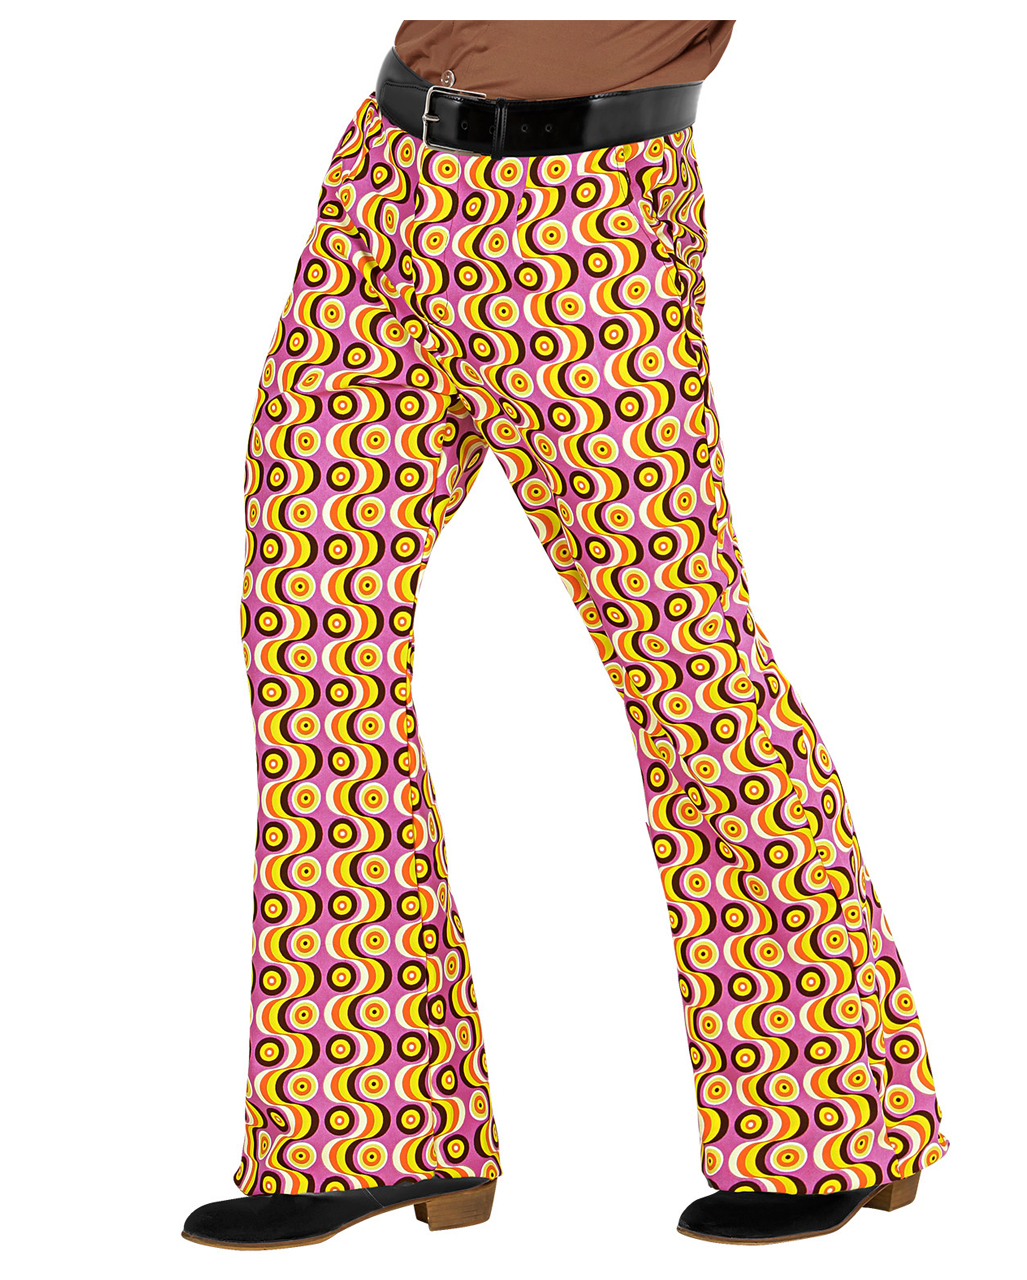 pants in the 70s